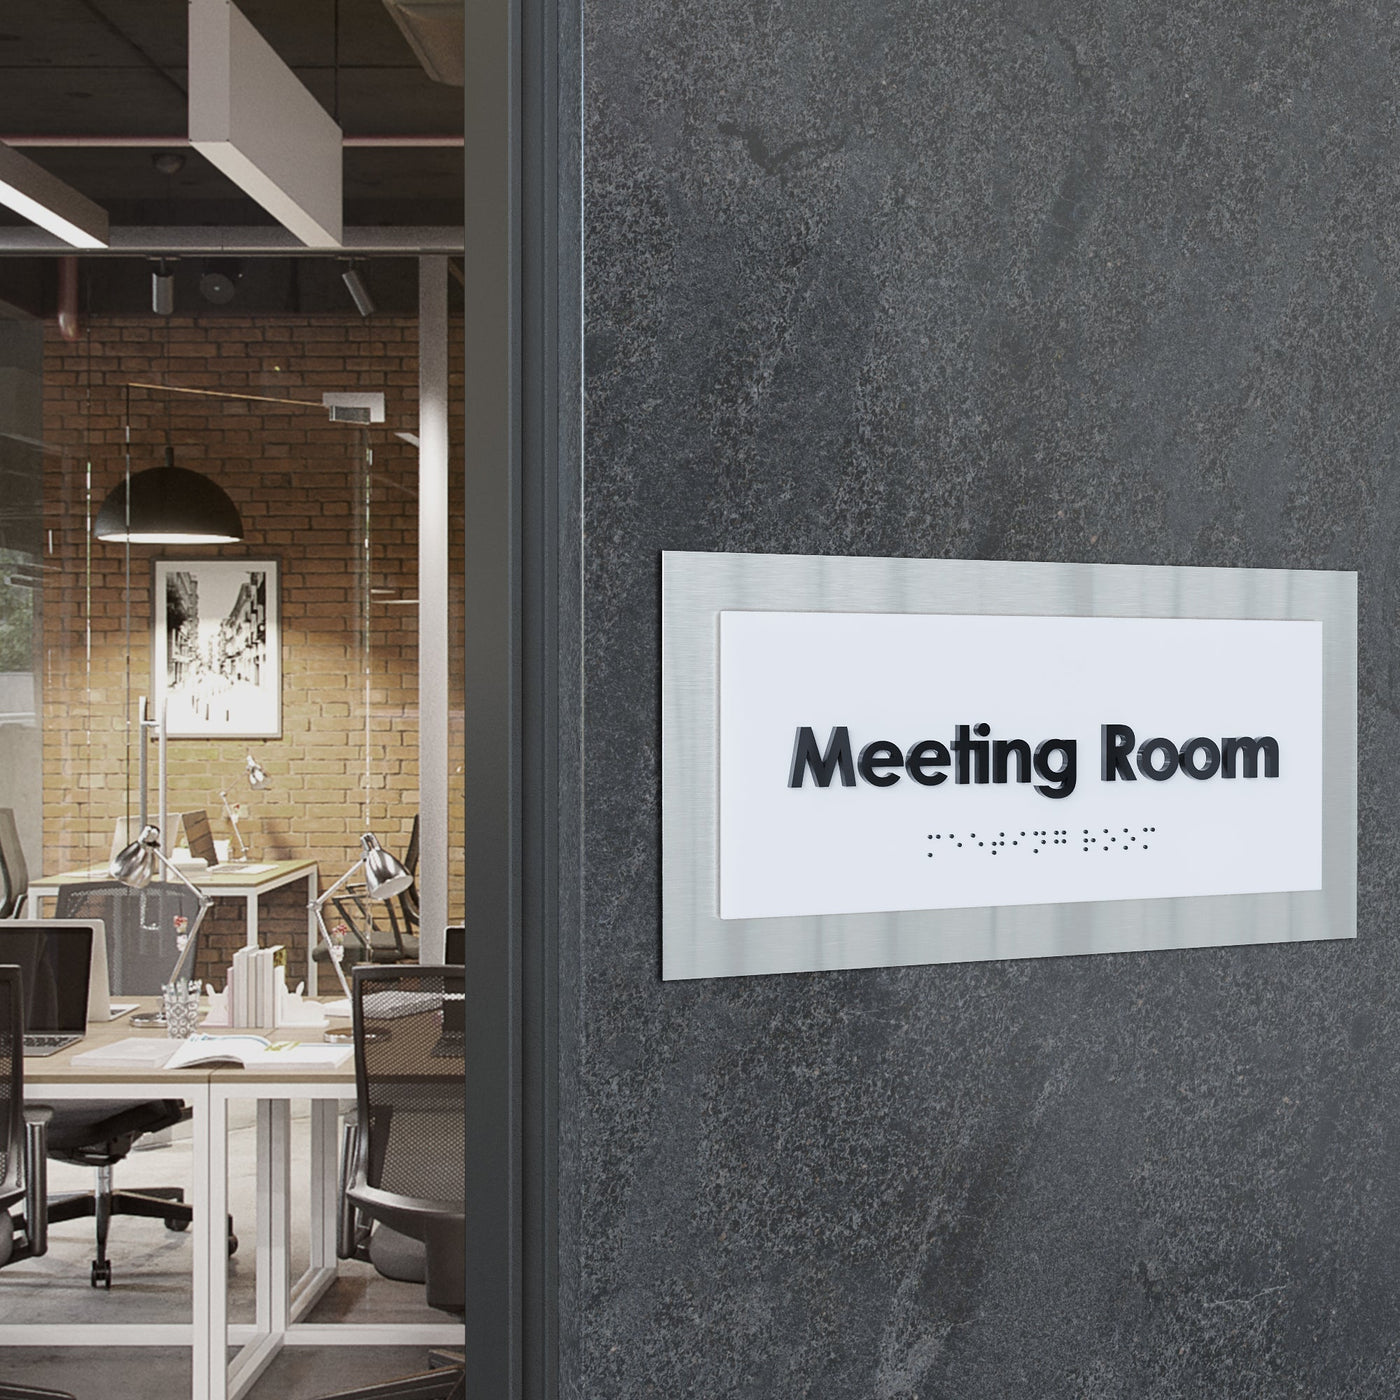 Door Signs - Conference Room - Stainless Steel Sign - "Modern" Design